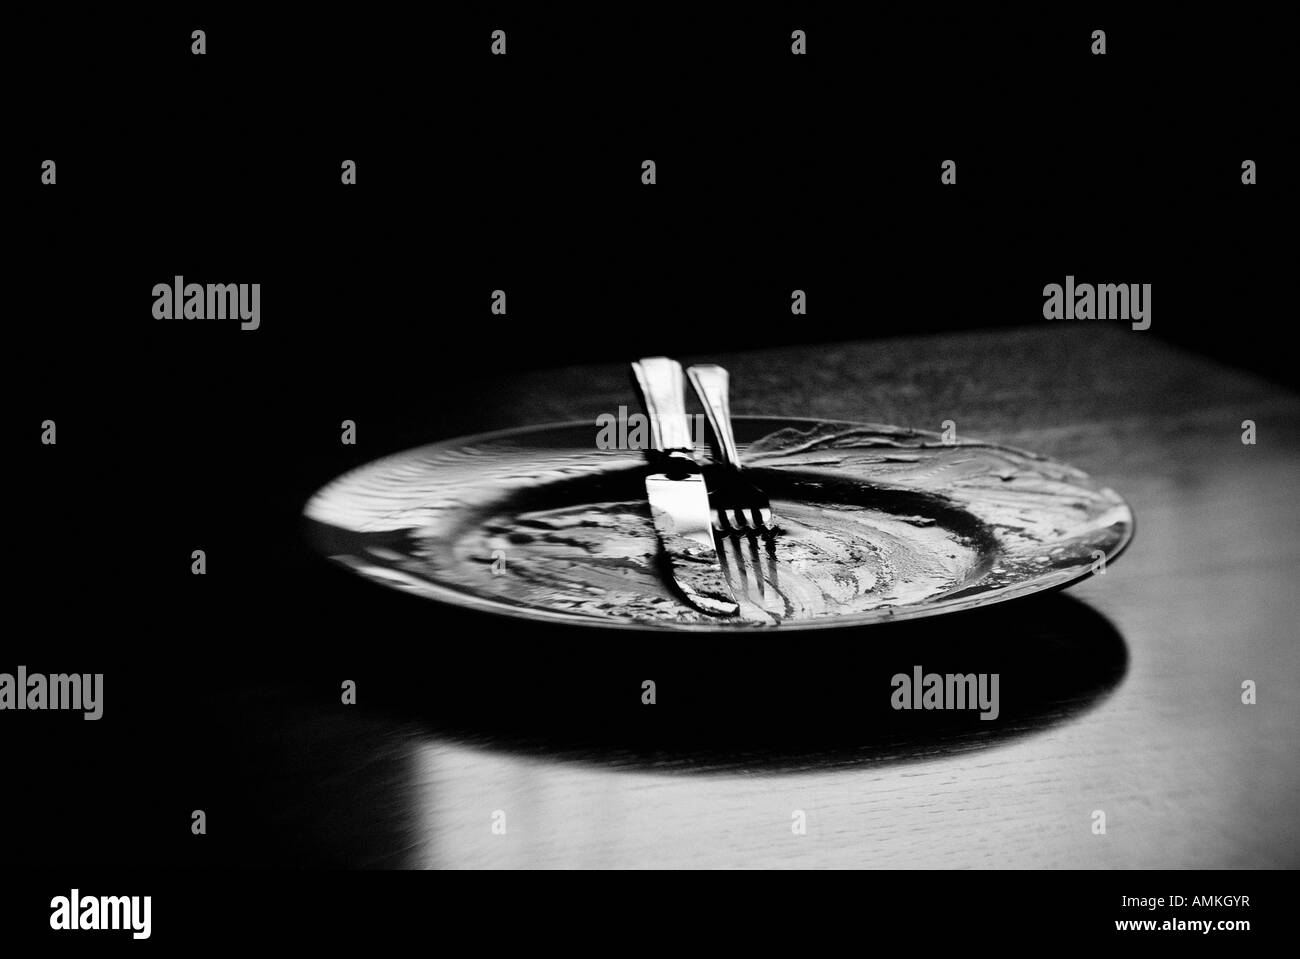 Black and white image of an empty dinner plate and cutlery Stock Photo